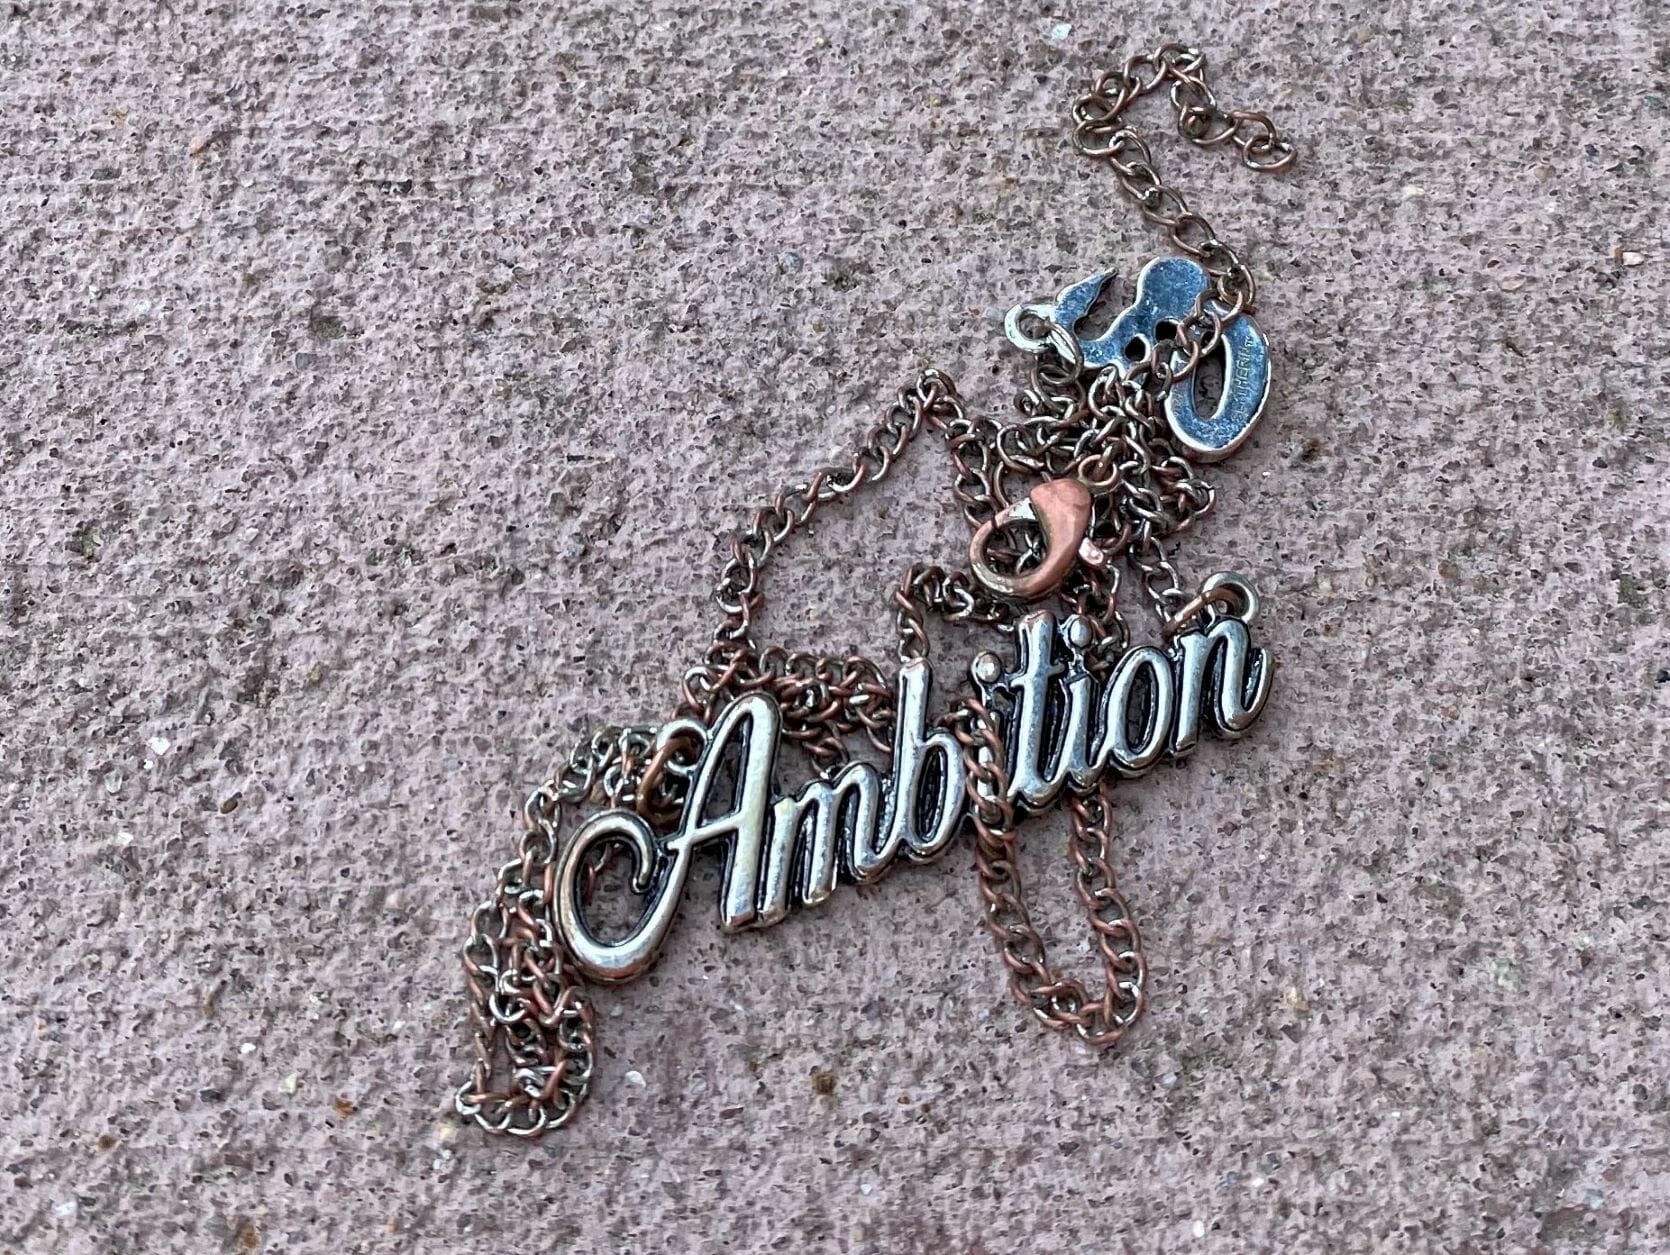 battered necklace that says Ambition - Differing Ambitions? Some Things Are Universal.